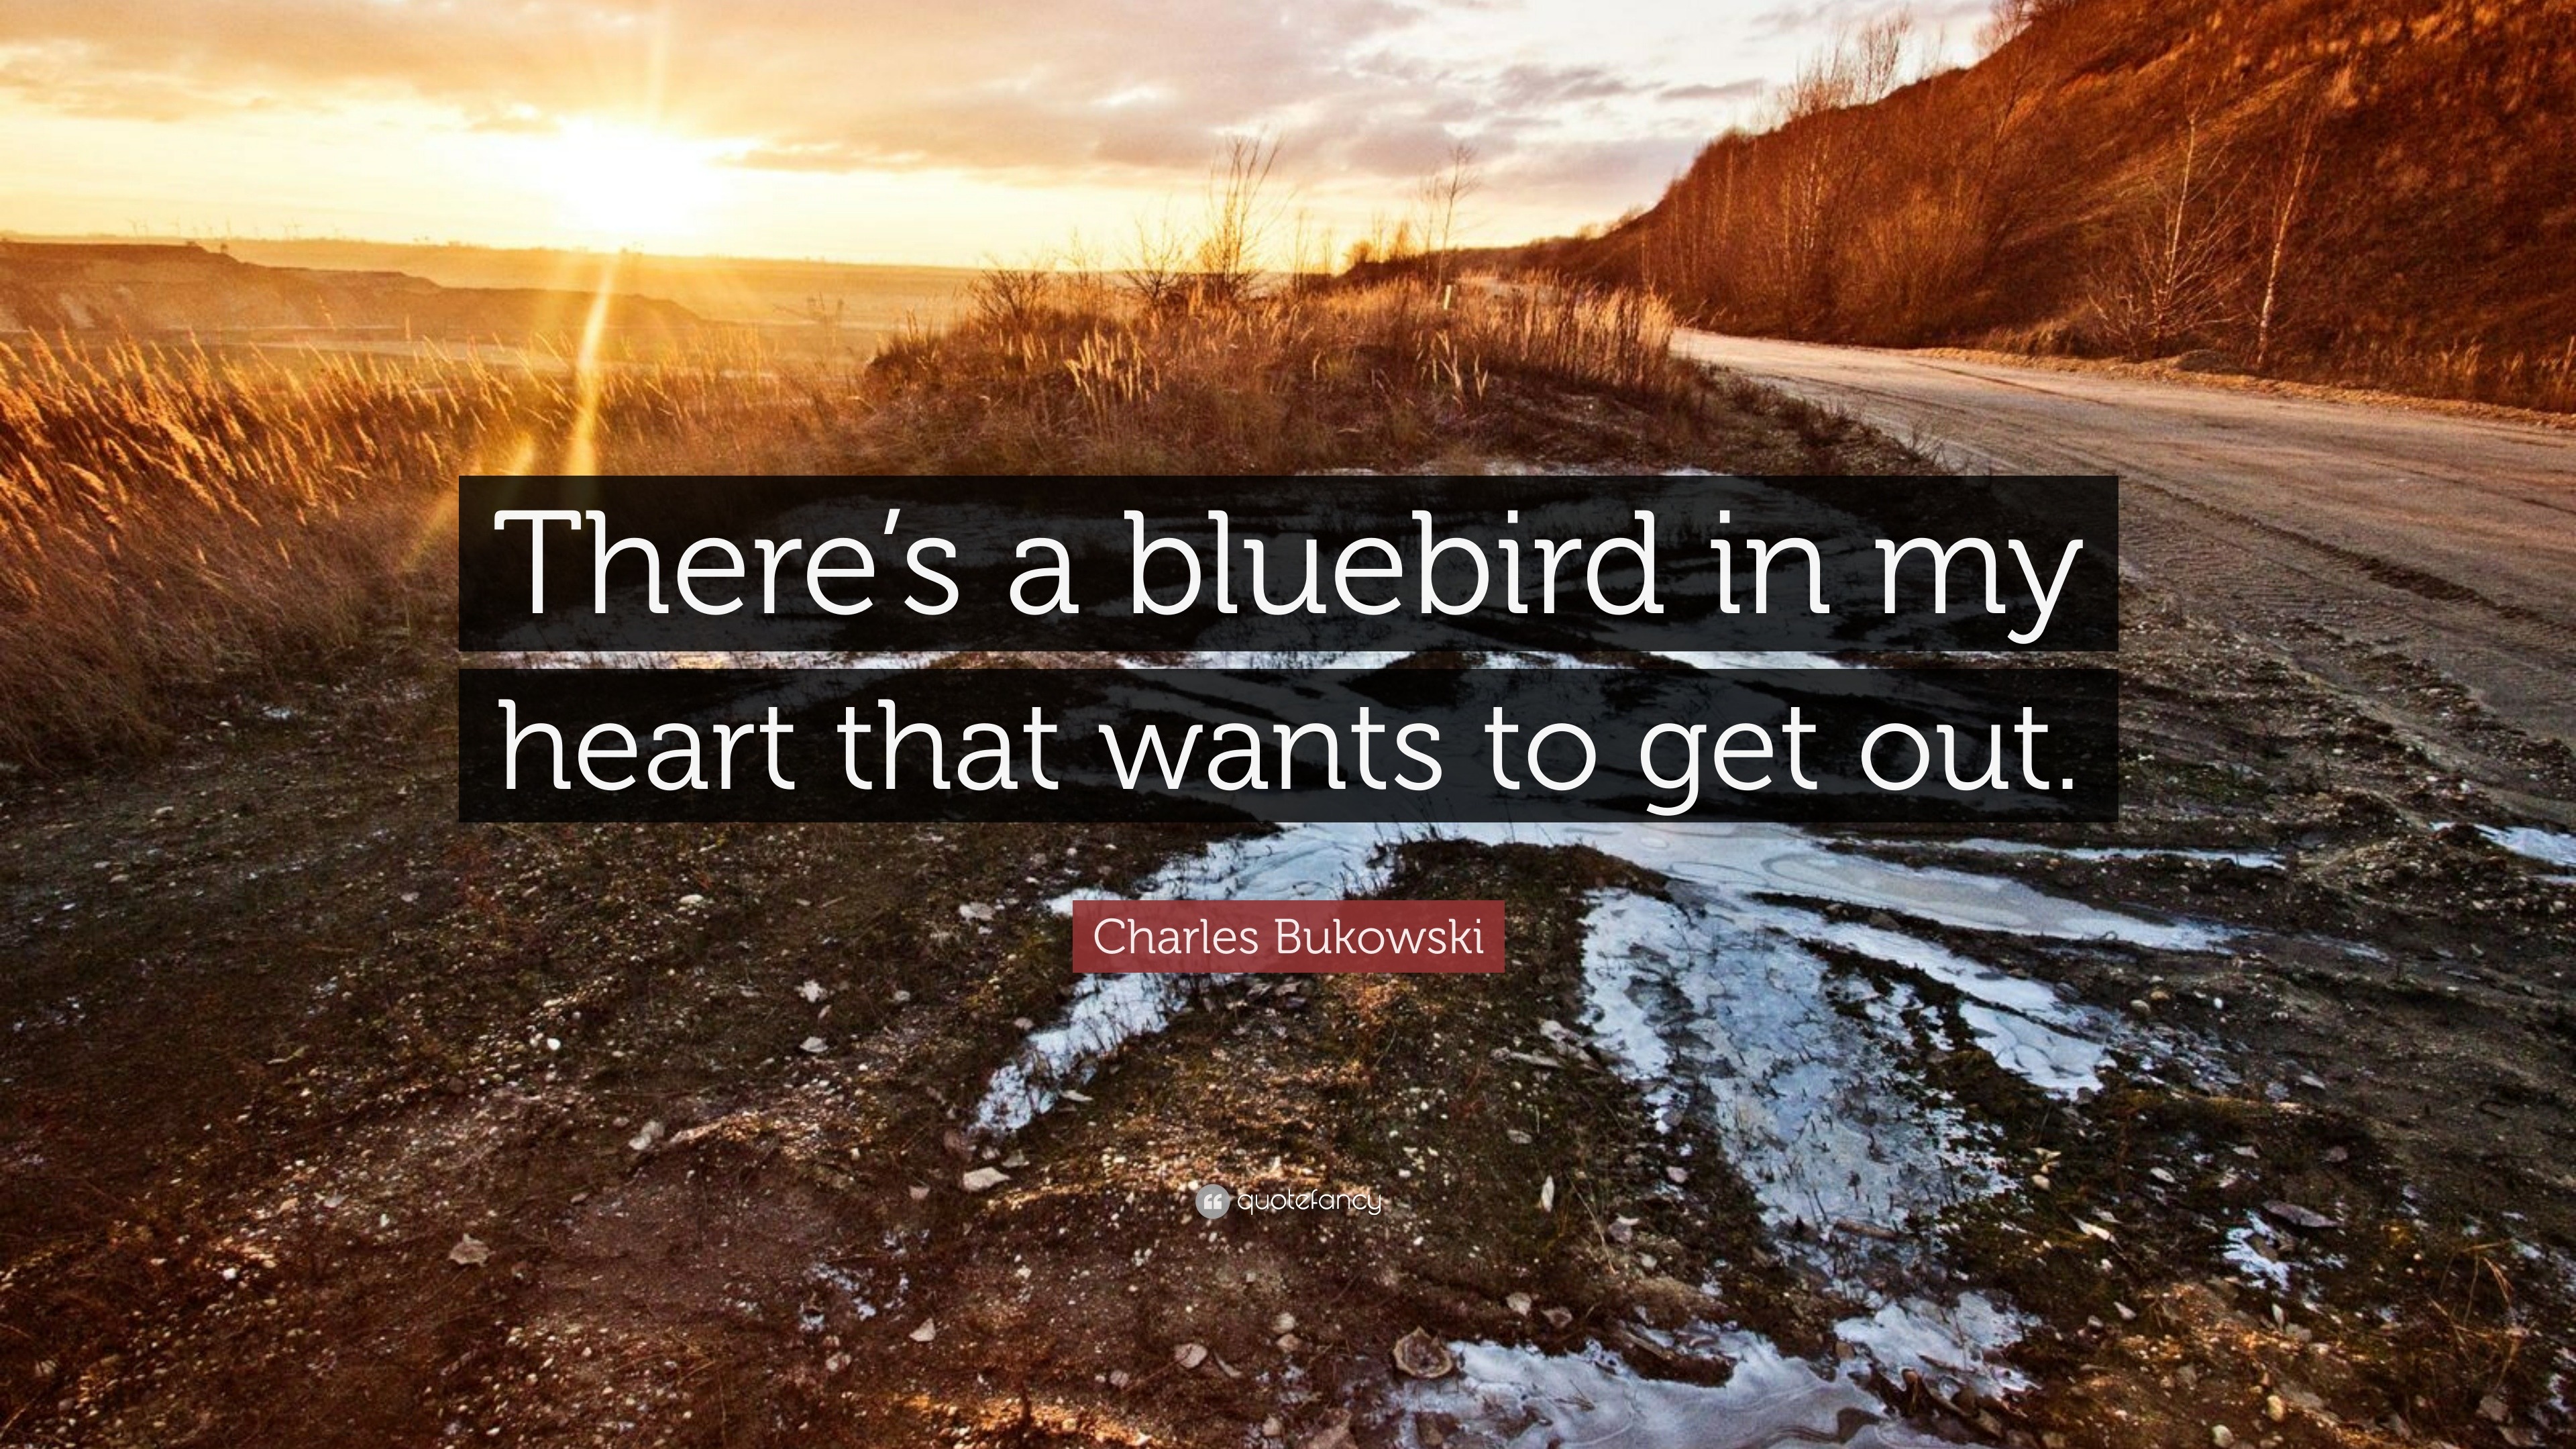 Charles Bukowski Quote “there S A Bluebird In My Heart That Wants To Get Out ”